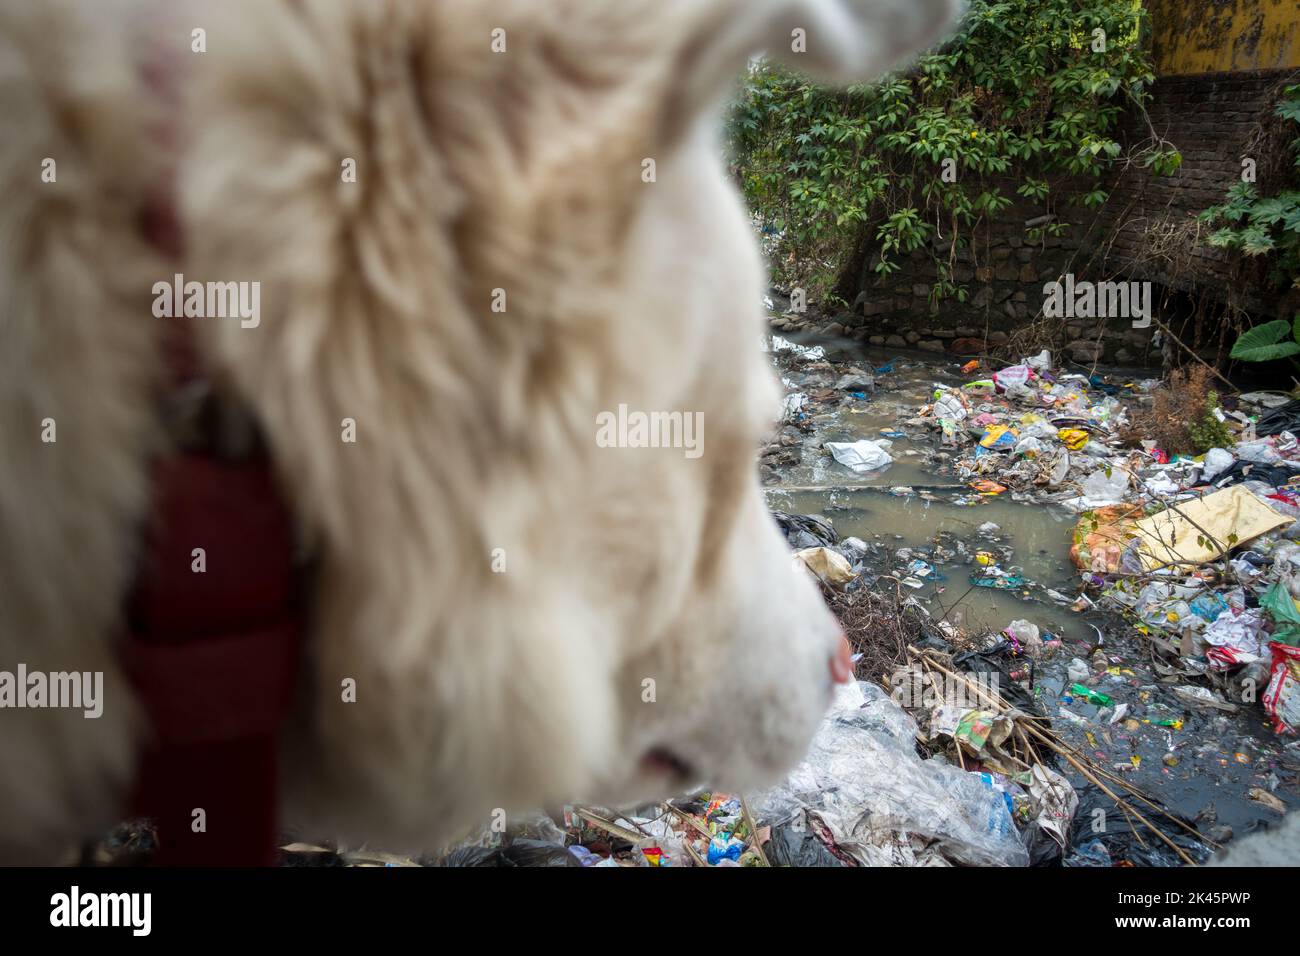 February 21st 2021 Dehradun India. White domestic himalayan shepherd dog on a leash looking at an open sewer full of garbage. Selective focus. Stock Photo